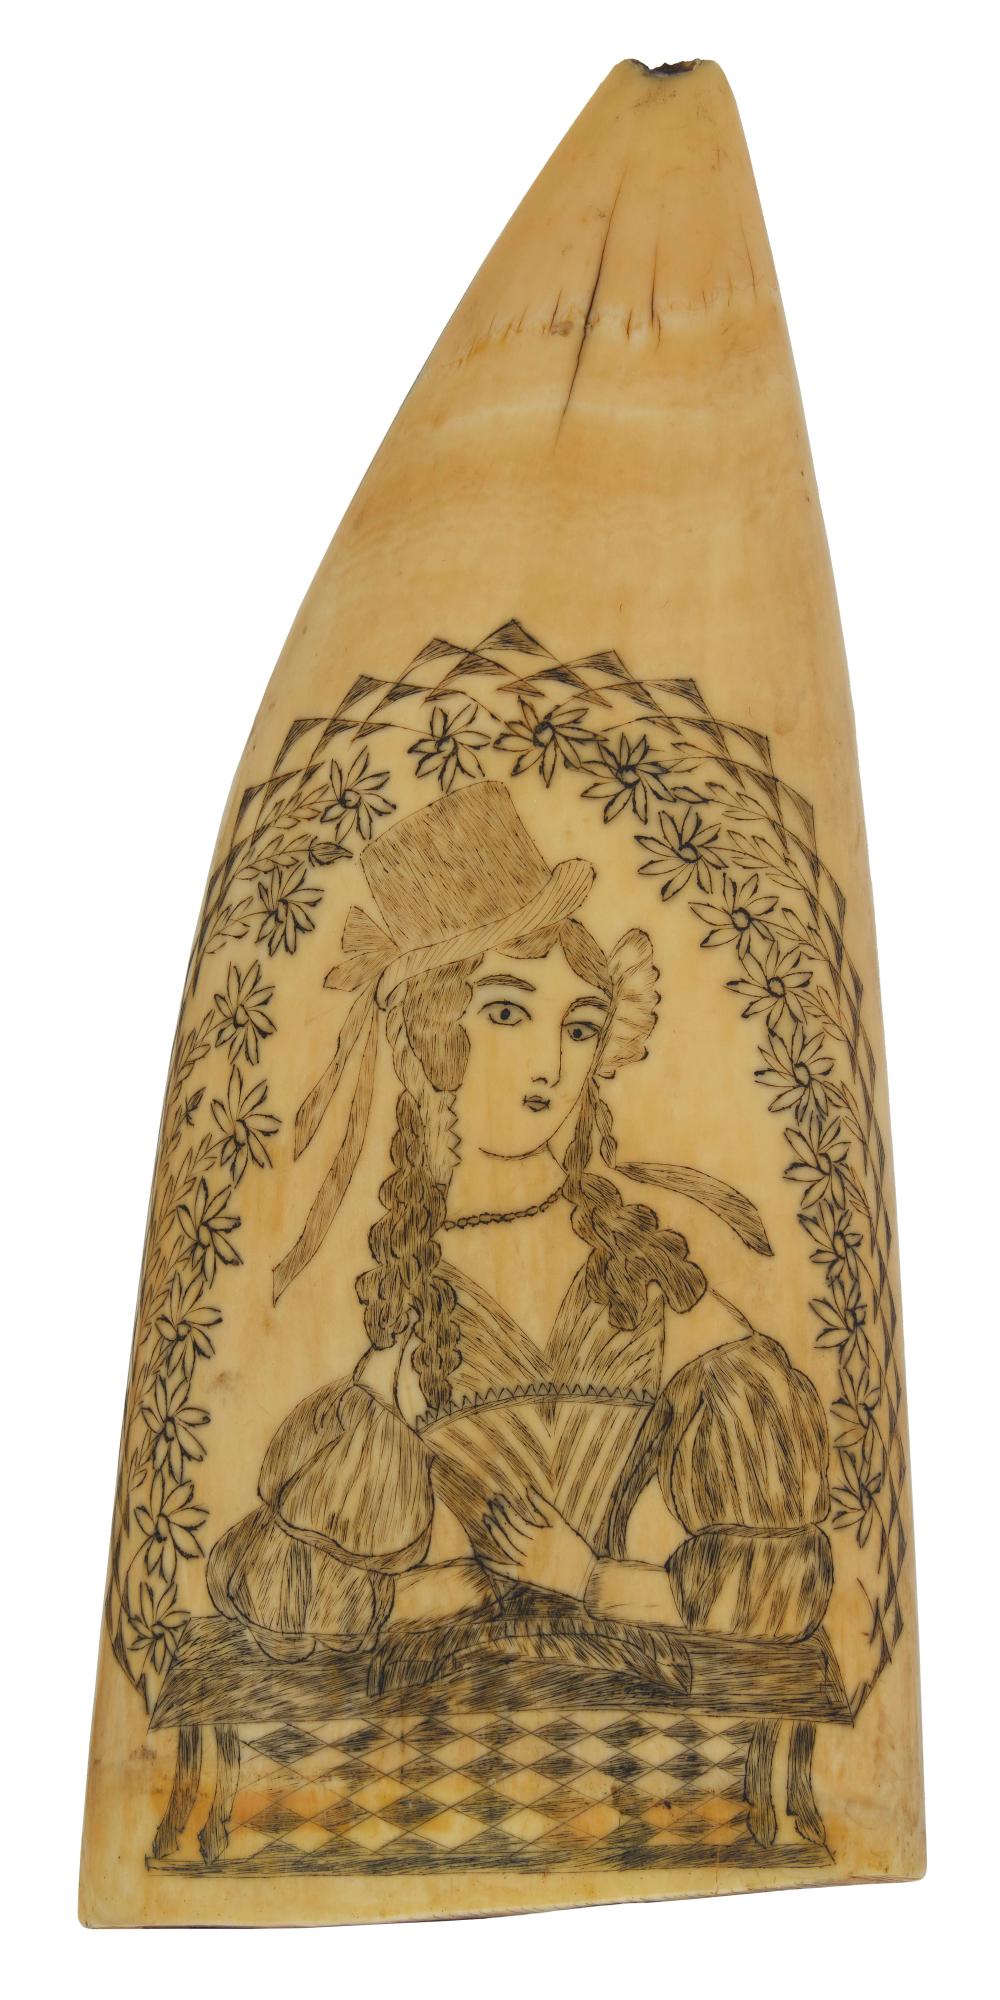 SCRIMSHAW WHALE'S TOOTH WITH PORTRAIT